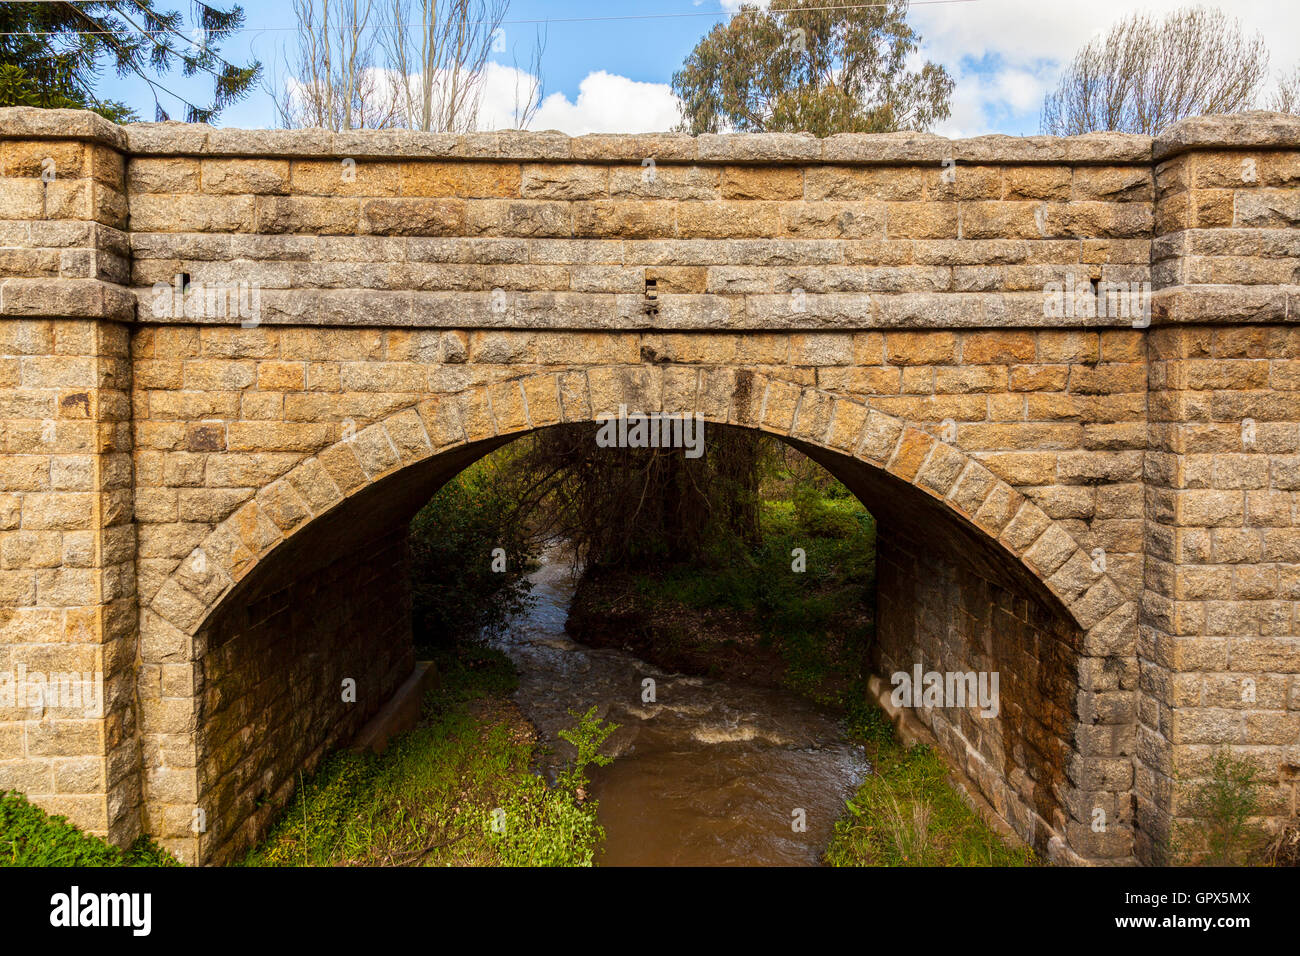 Stone bridge, hand carved stone bricks, water flowing, arched structure Stock Photo